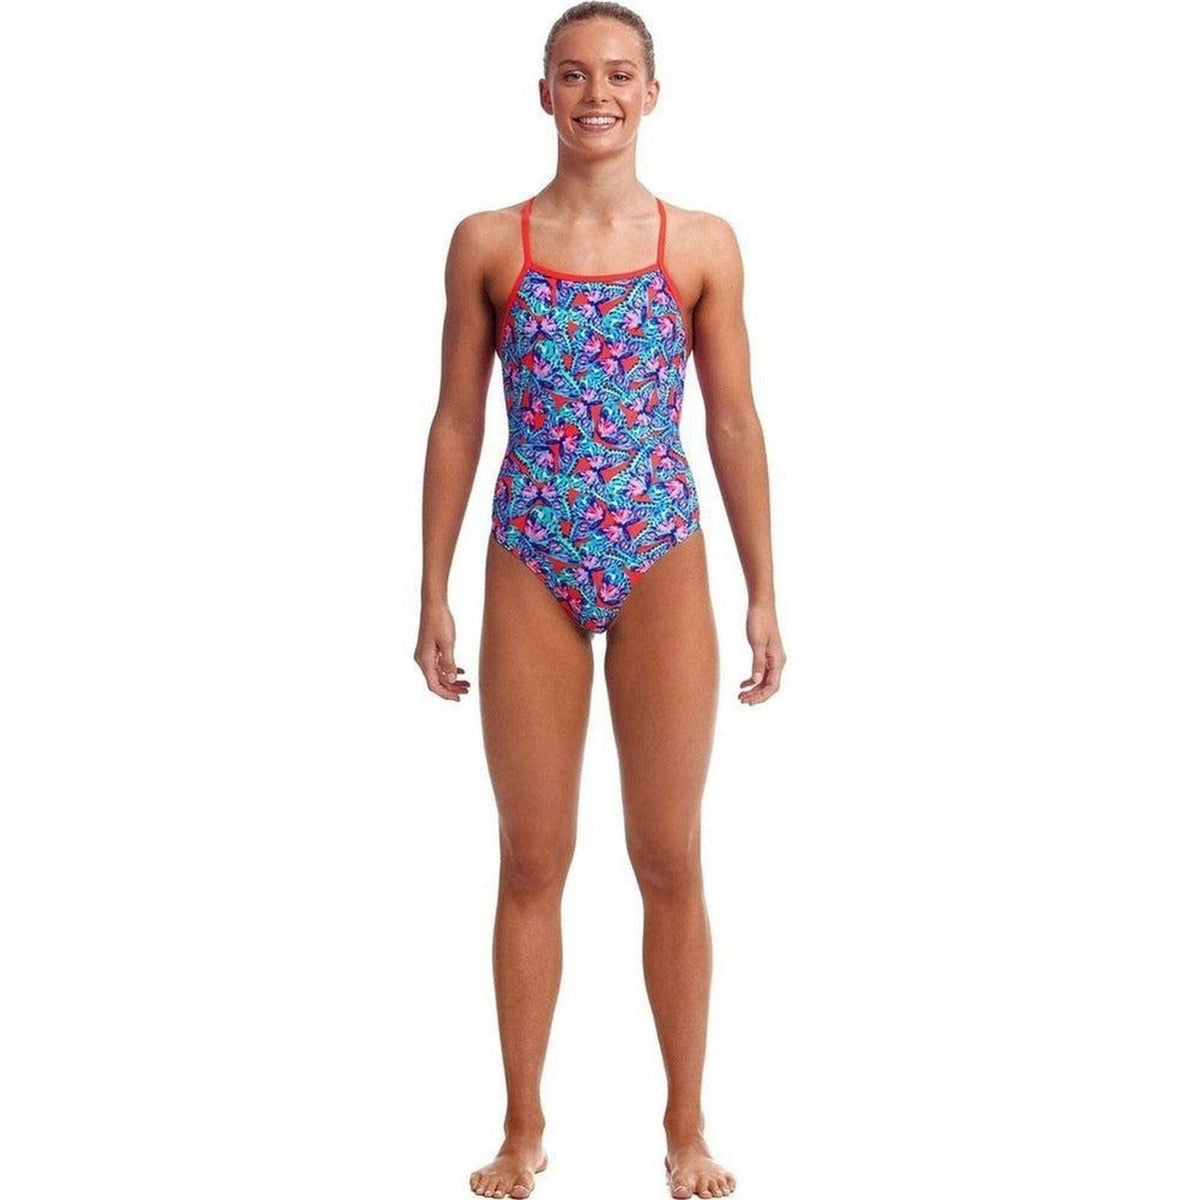 Funkita Girls Strapped In One Piece Swimsuit - Fly Free